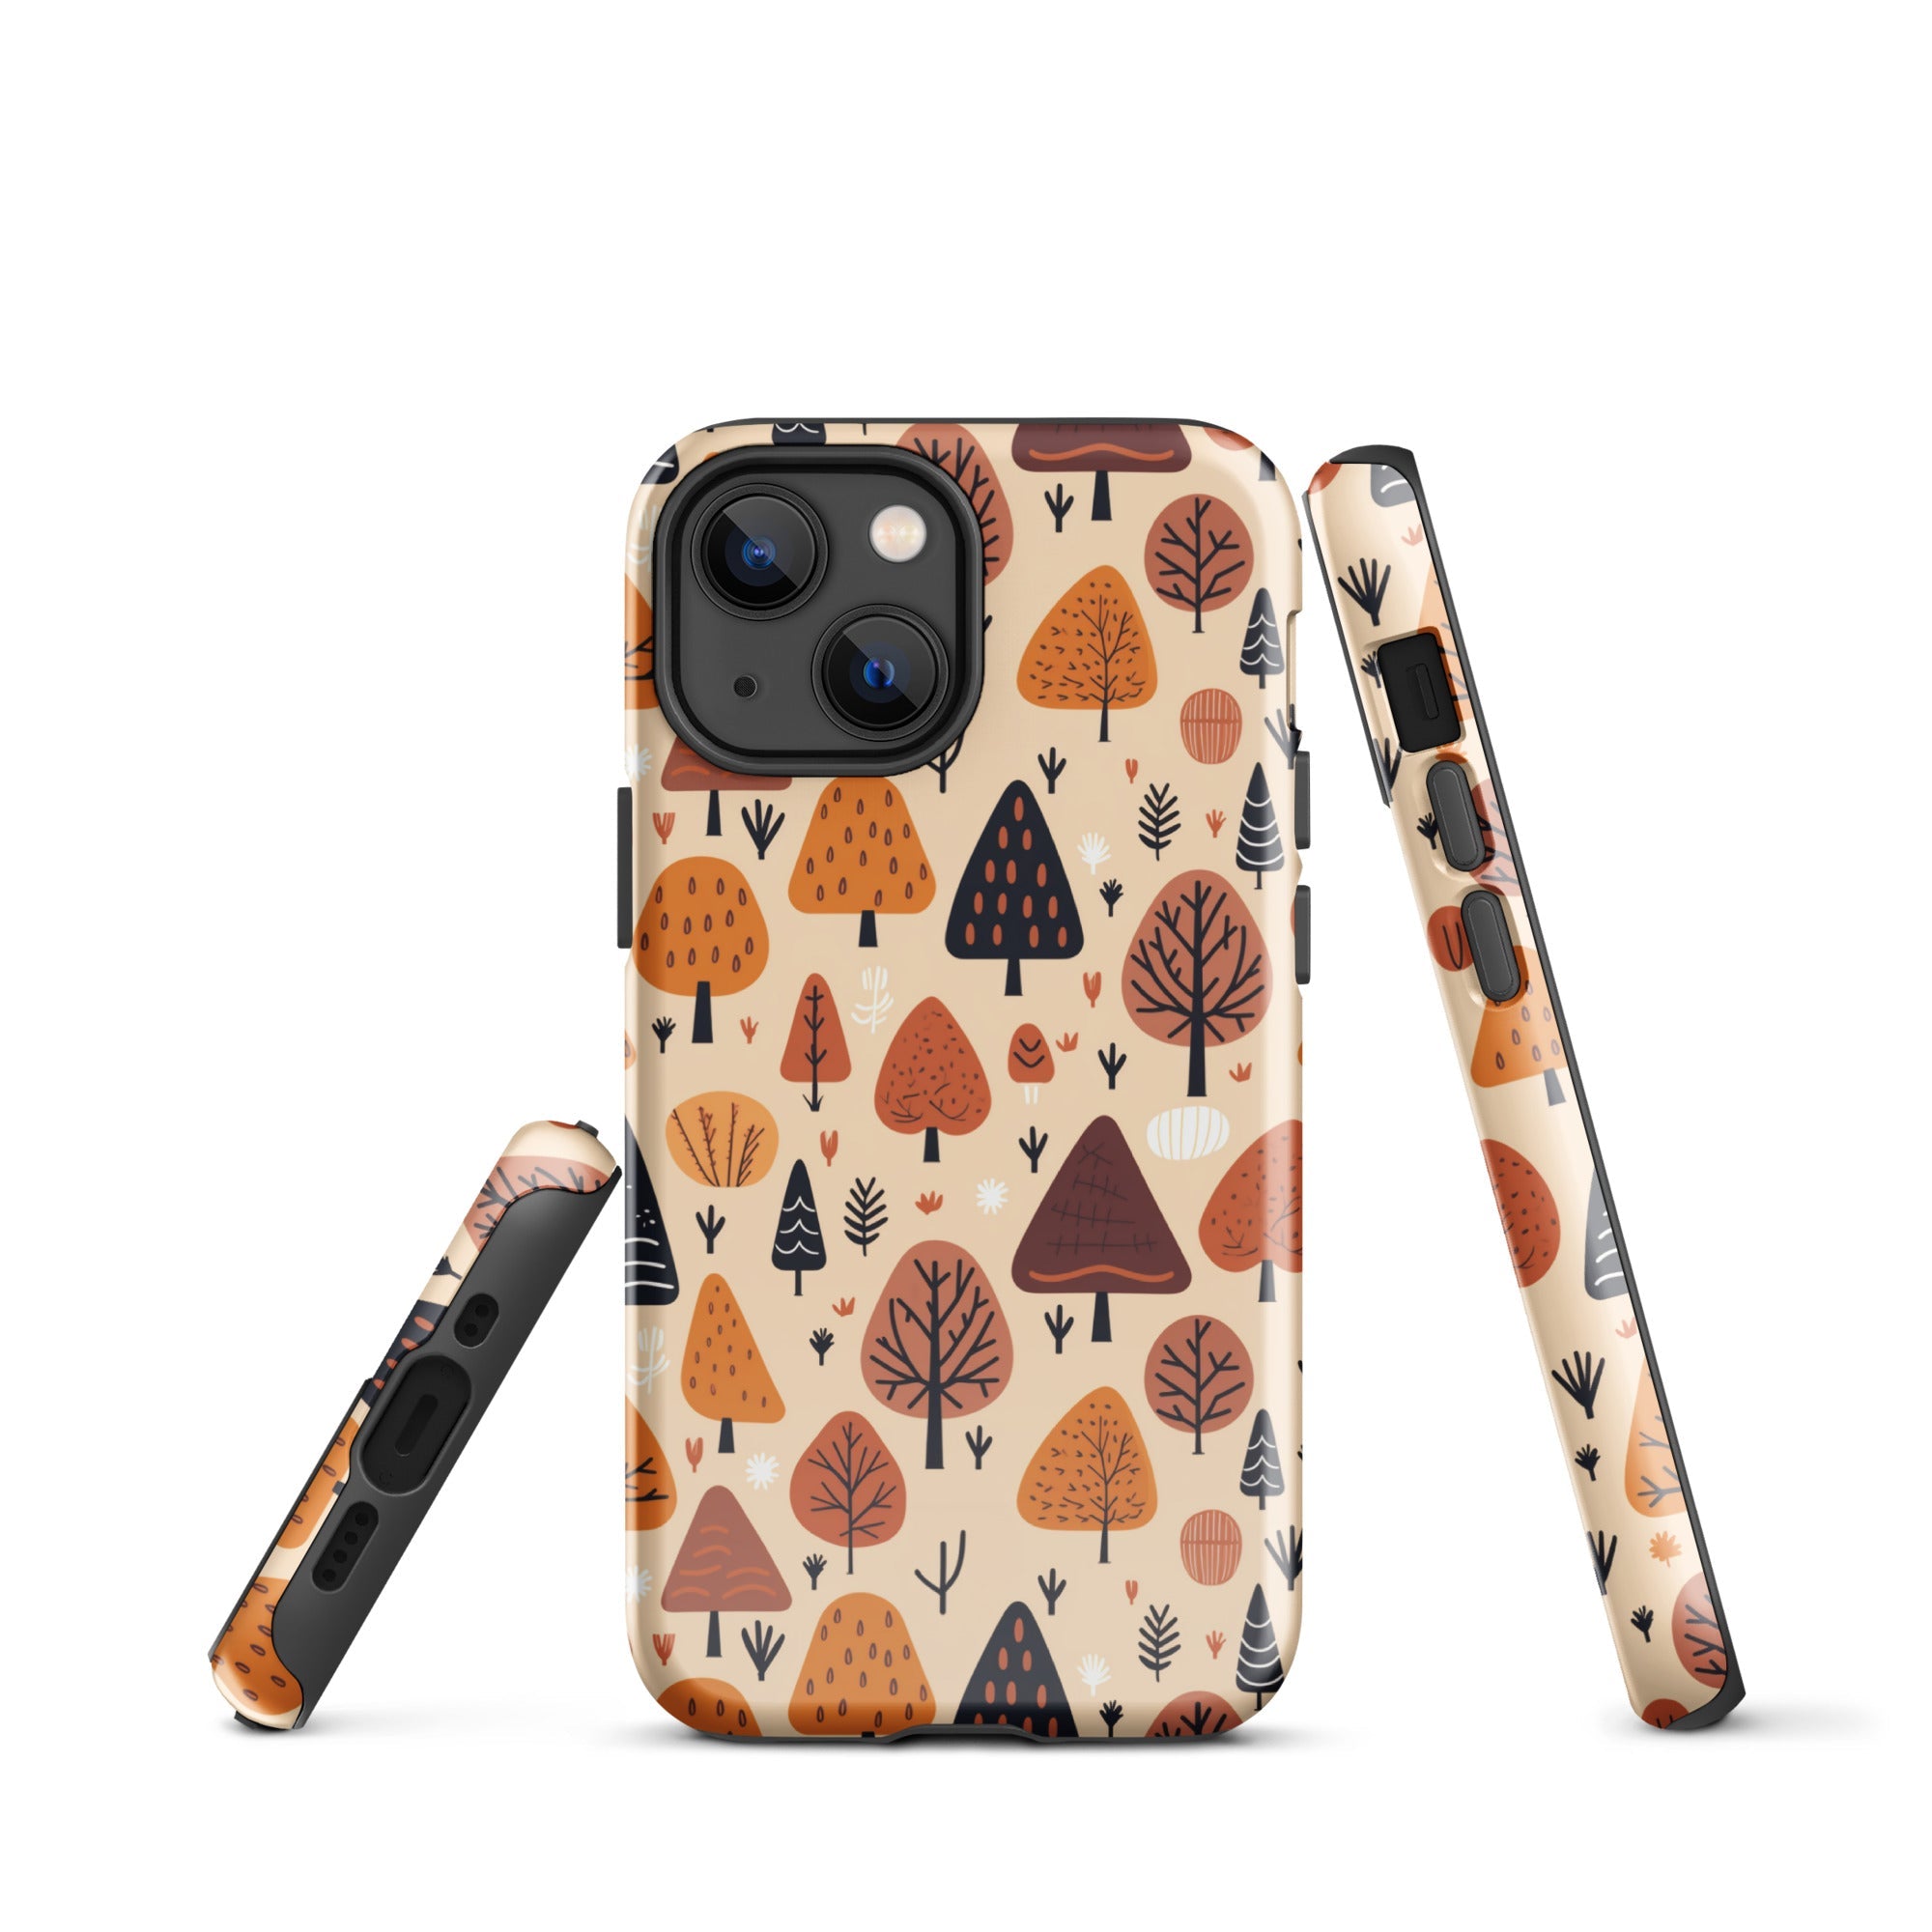 Terracotta Tree Tapestry - A Playful Autumn Mosaic - iPhone Case - Pattern Symphony